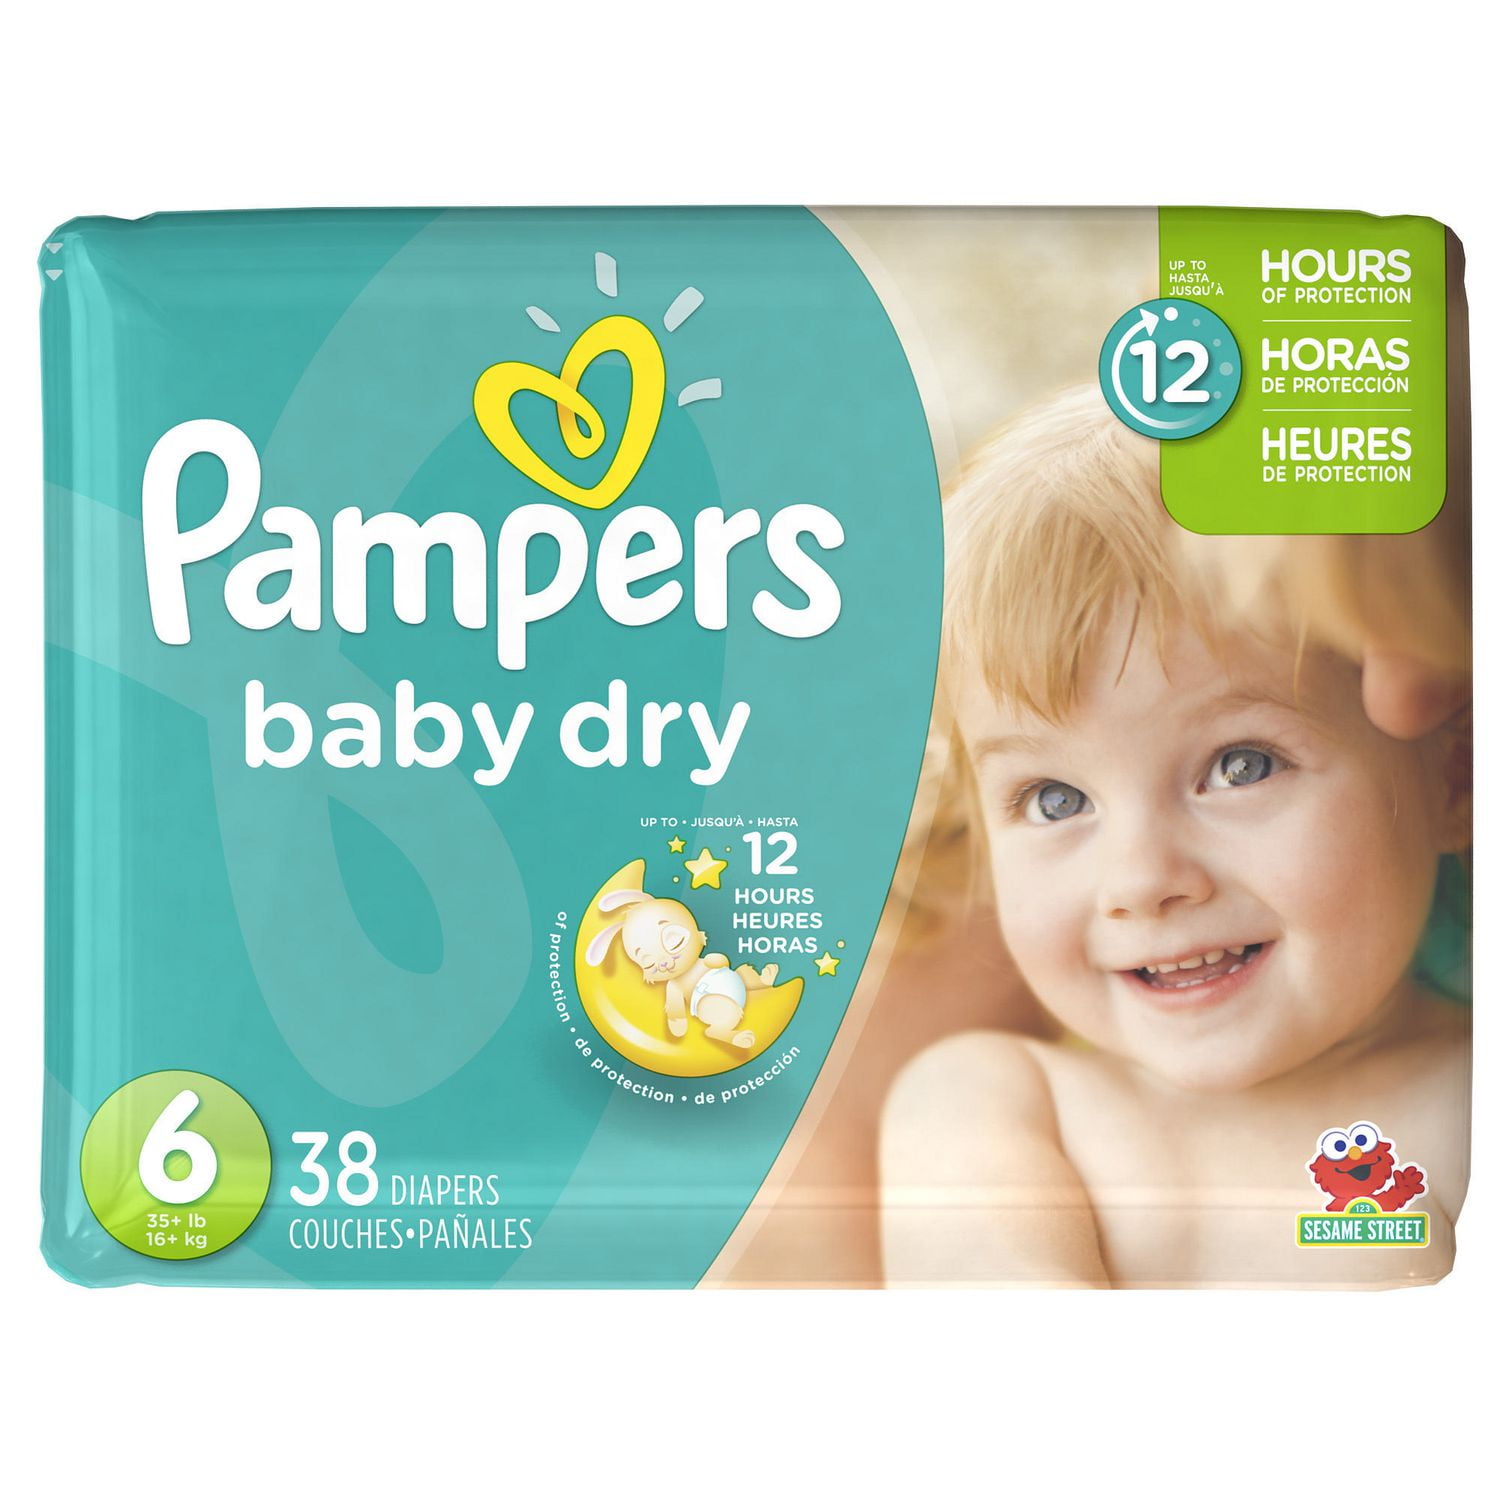 Couches Baby Dry, taille 6, format jumbo, 21 unités – Pampers : Couche